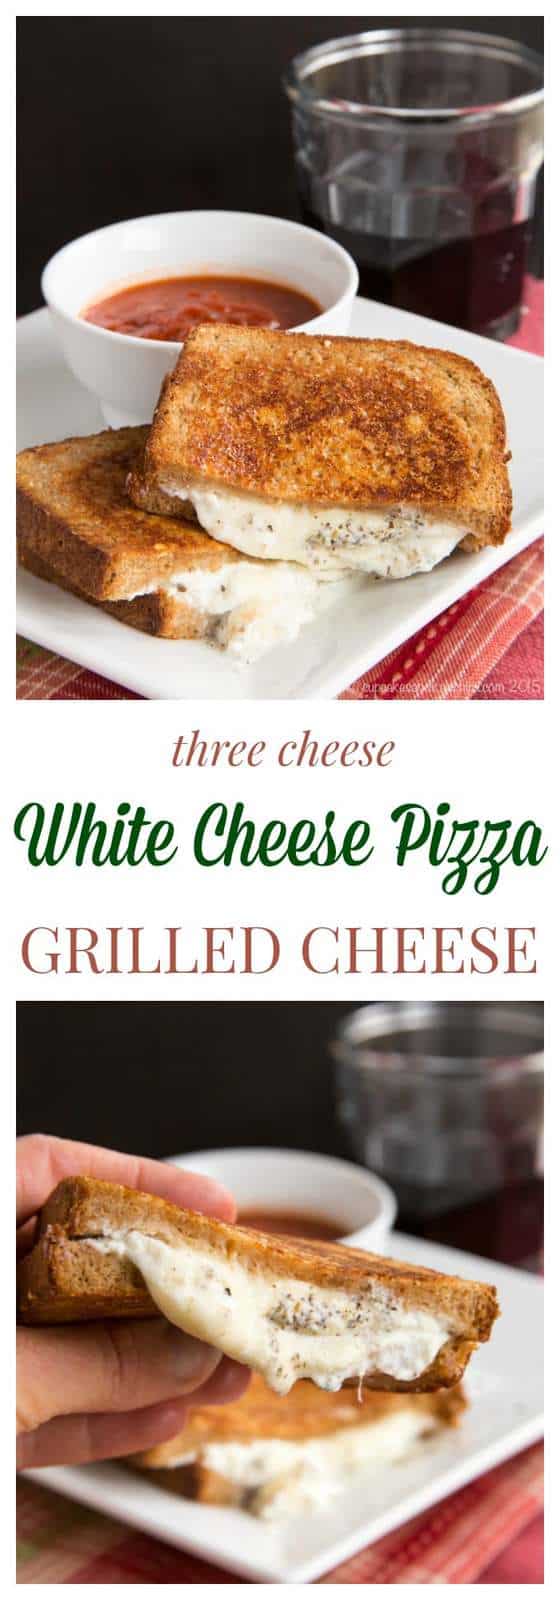 Three Cheese White Cheese Pizza Grilled Cheese combines the cheesy goodness of white pizza and the classic comfort food sandwich in one. No need to order delivery or make pizza crust! | cupcakesandkalechips.com | vegetarian